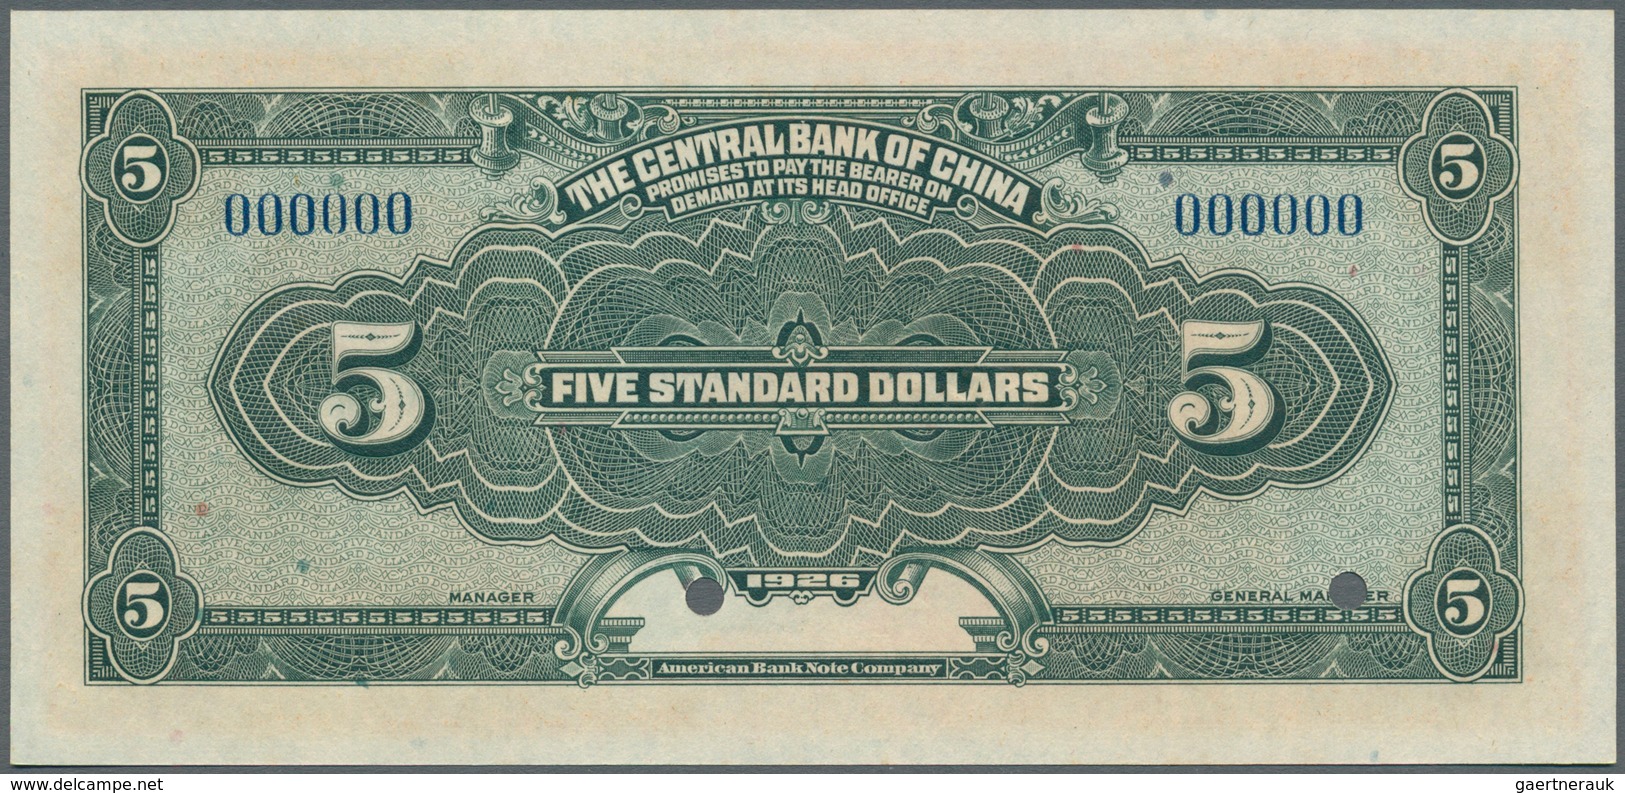 01291 China: The Central Bank Of China 5 Dollars 1926 Specimen P. 183s In Condition: UNC. - Cina